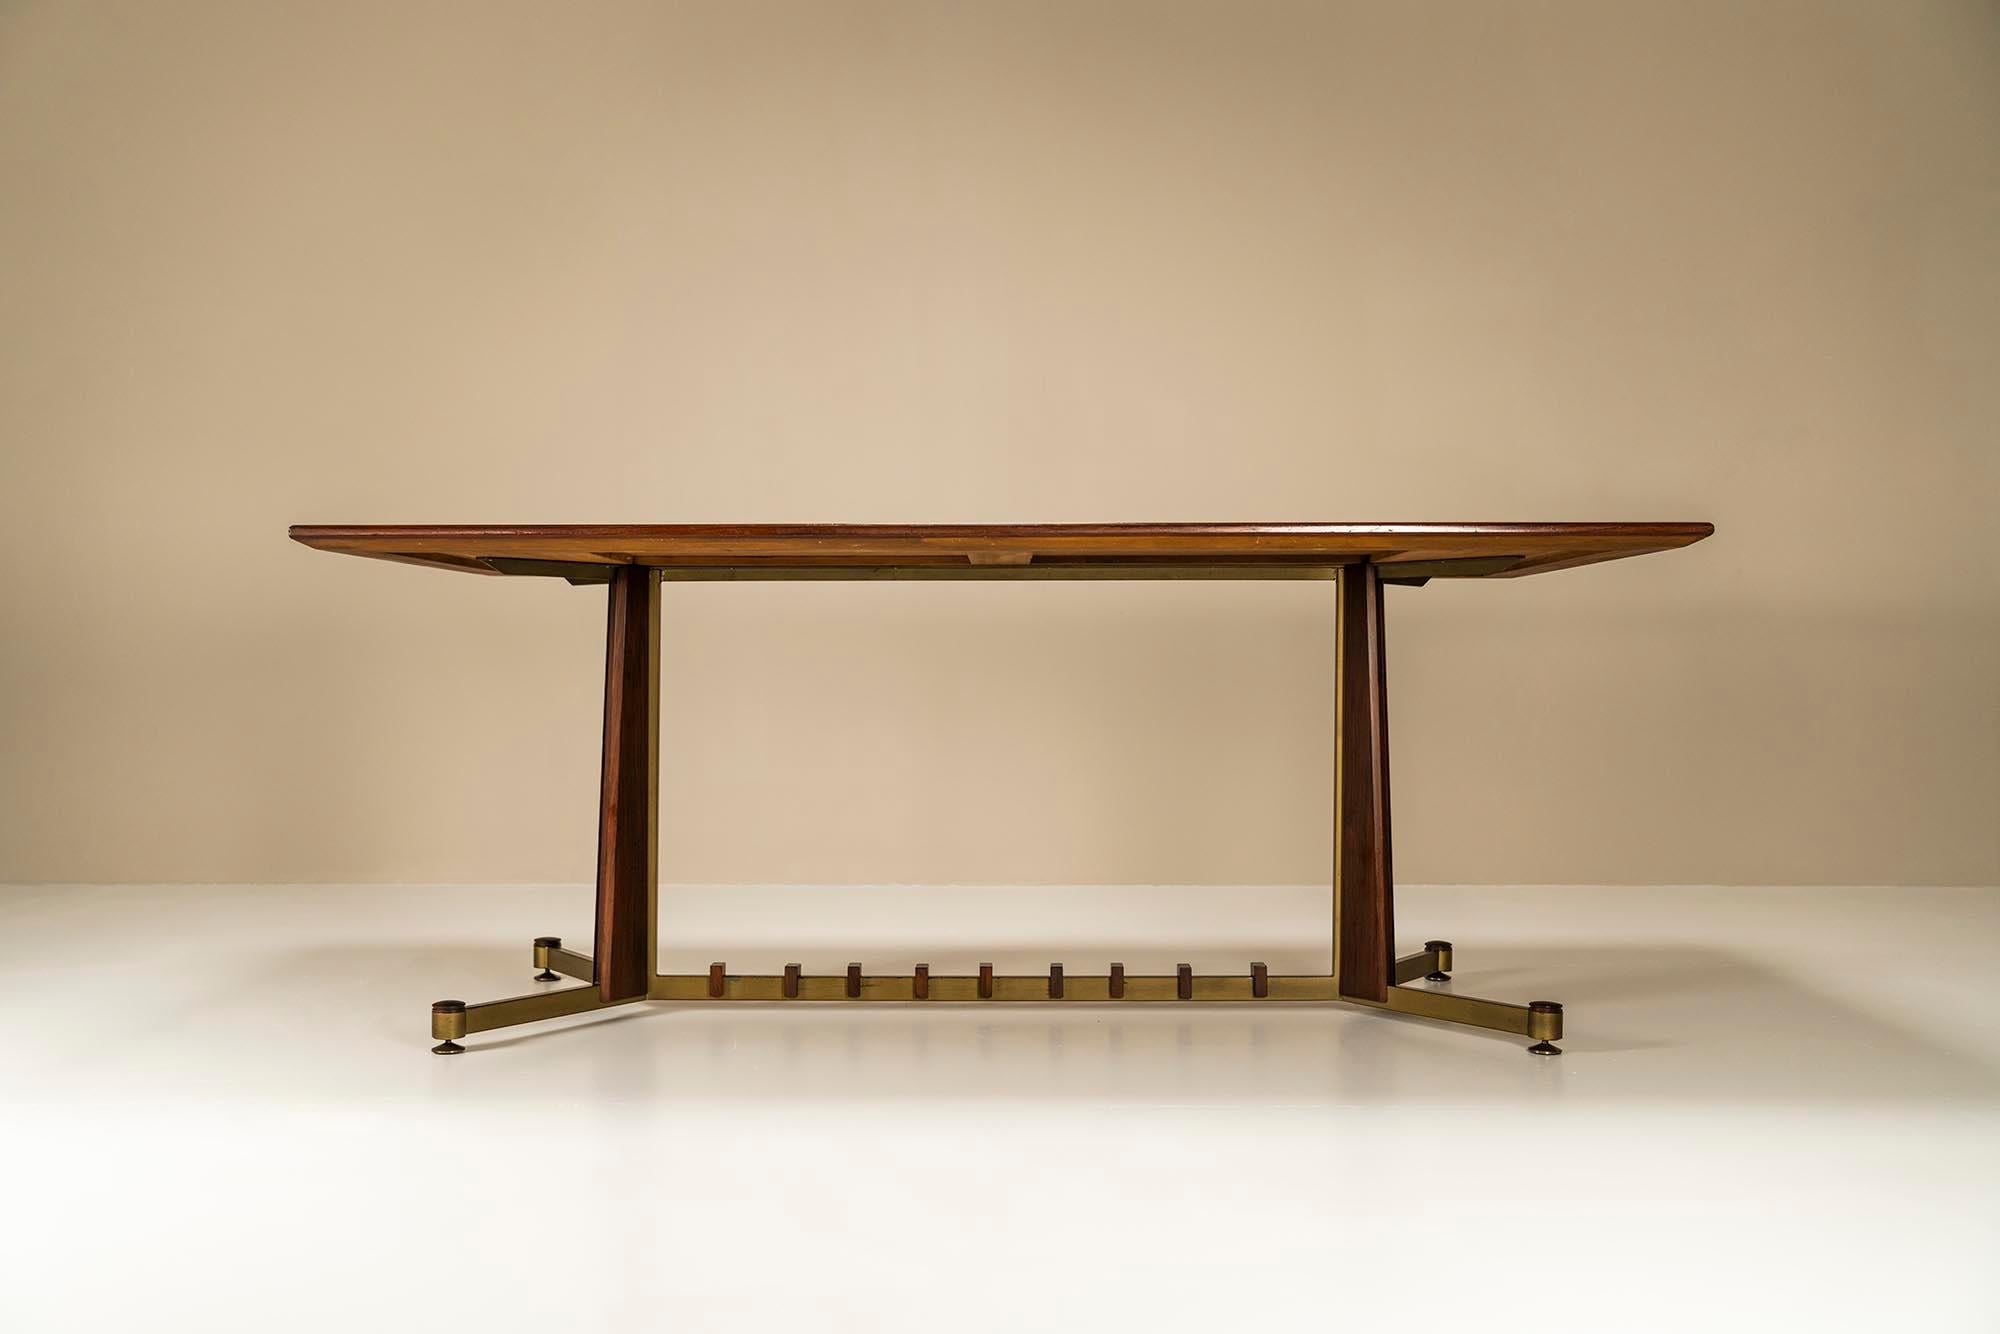 This Italian dining table from the 1960s stands out for its architectural design and choice of materials. Let's start with the frame that is characterized by a number of striking details. The round feet are made of brass and are adjustable by simply